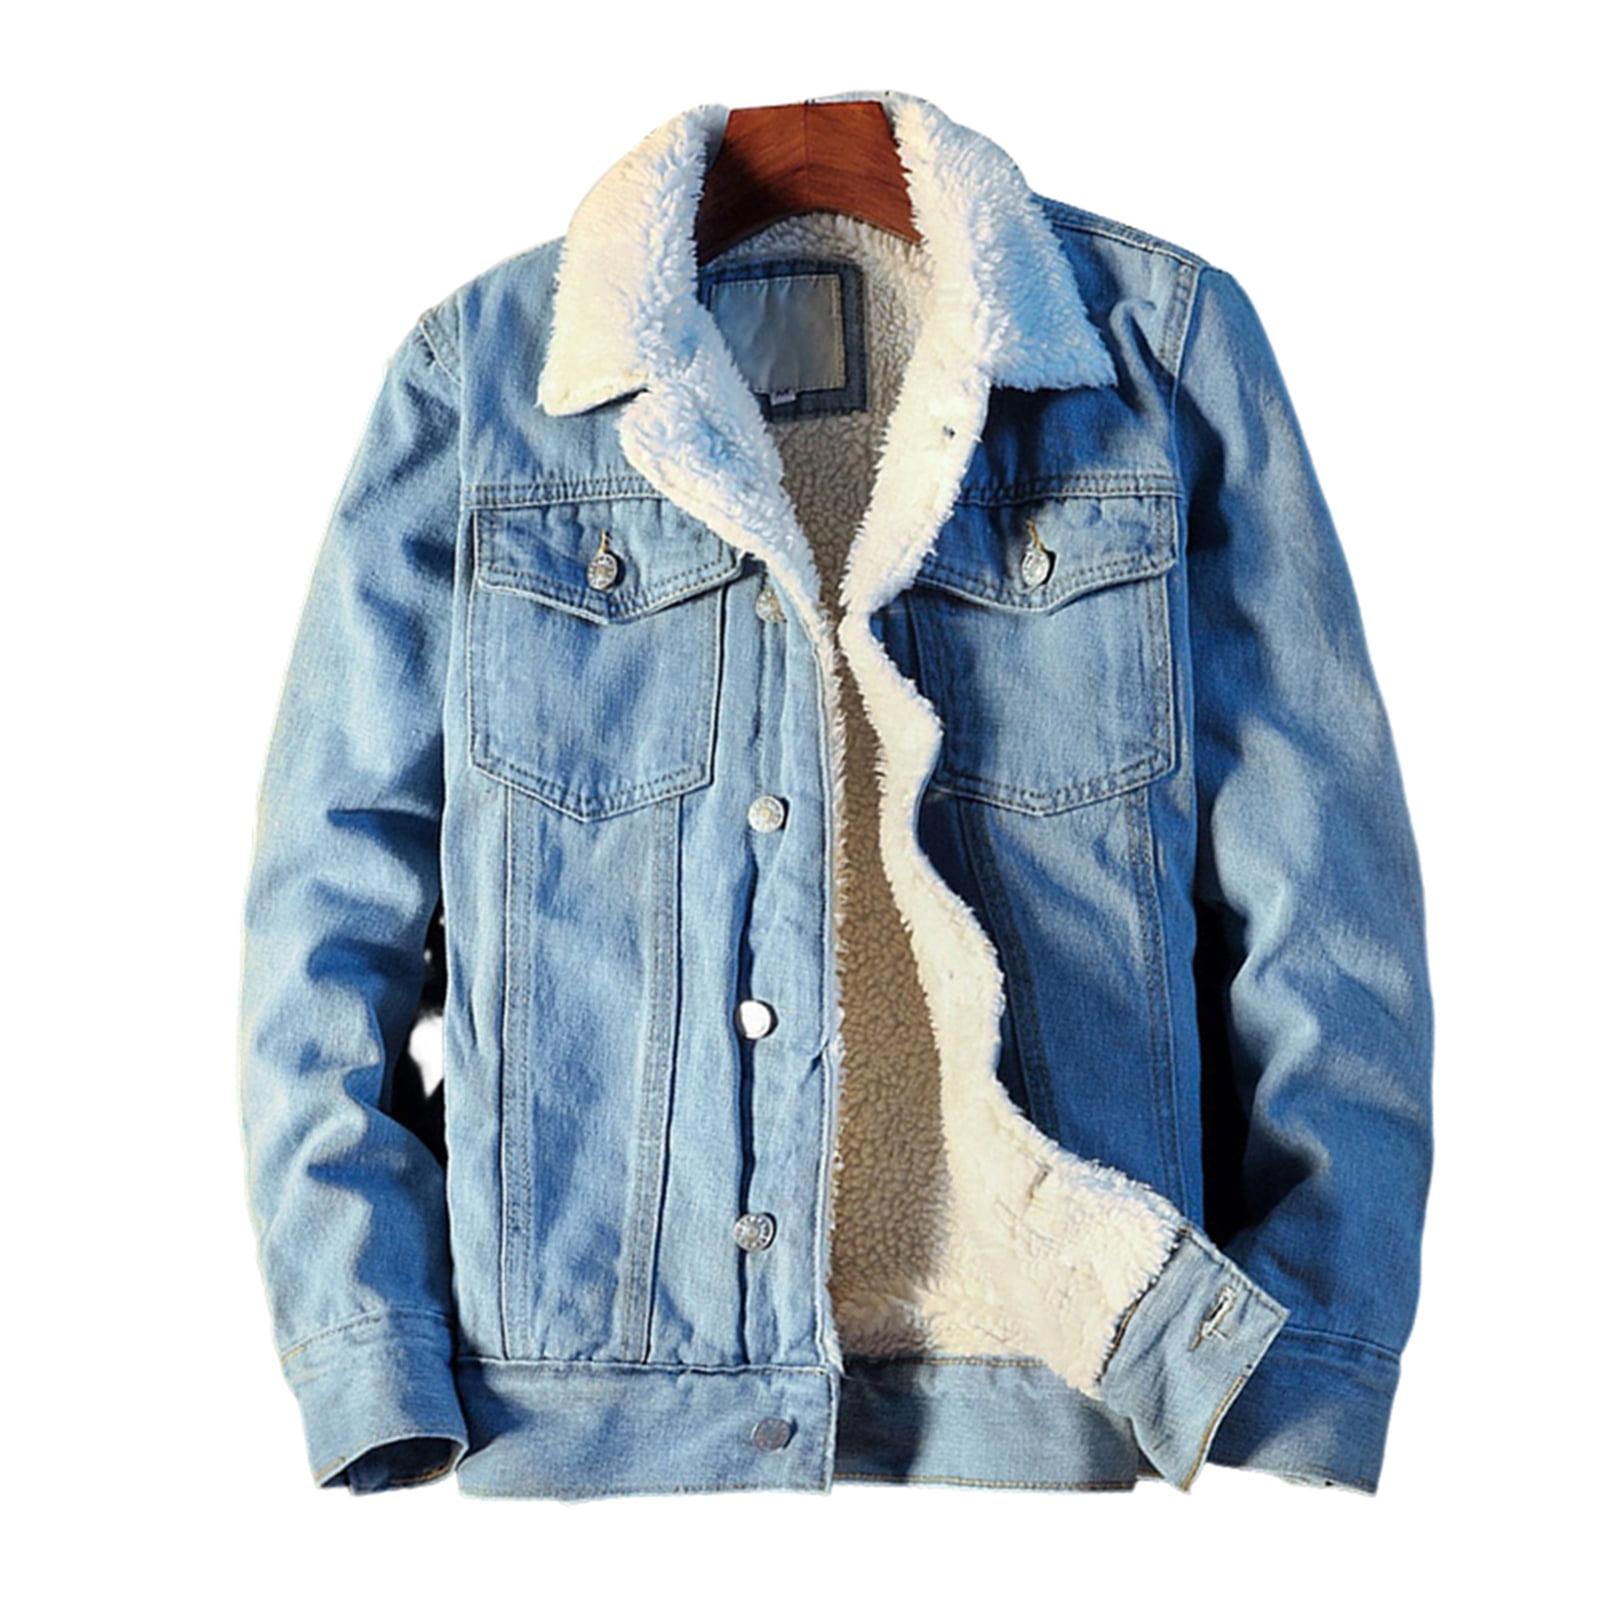 Discover more than 236 solid denim jacket for men latest